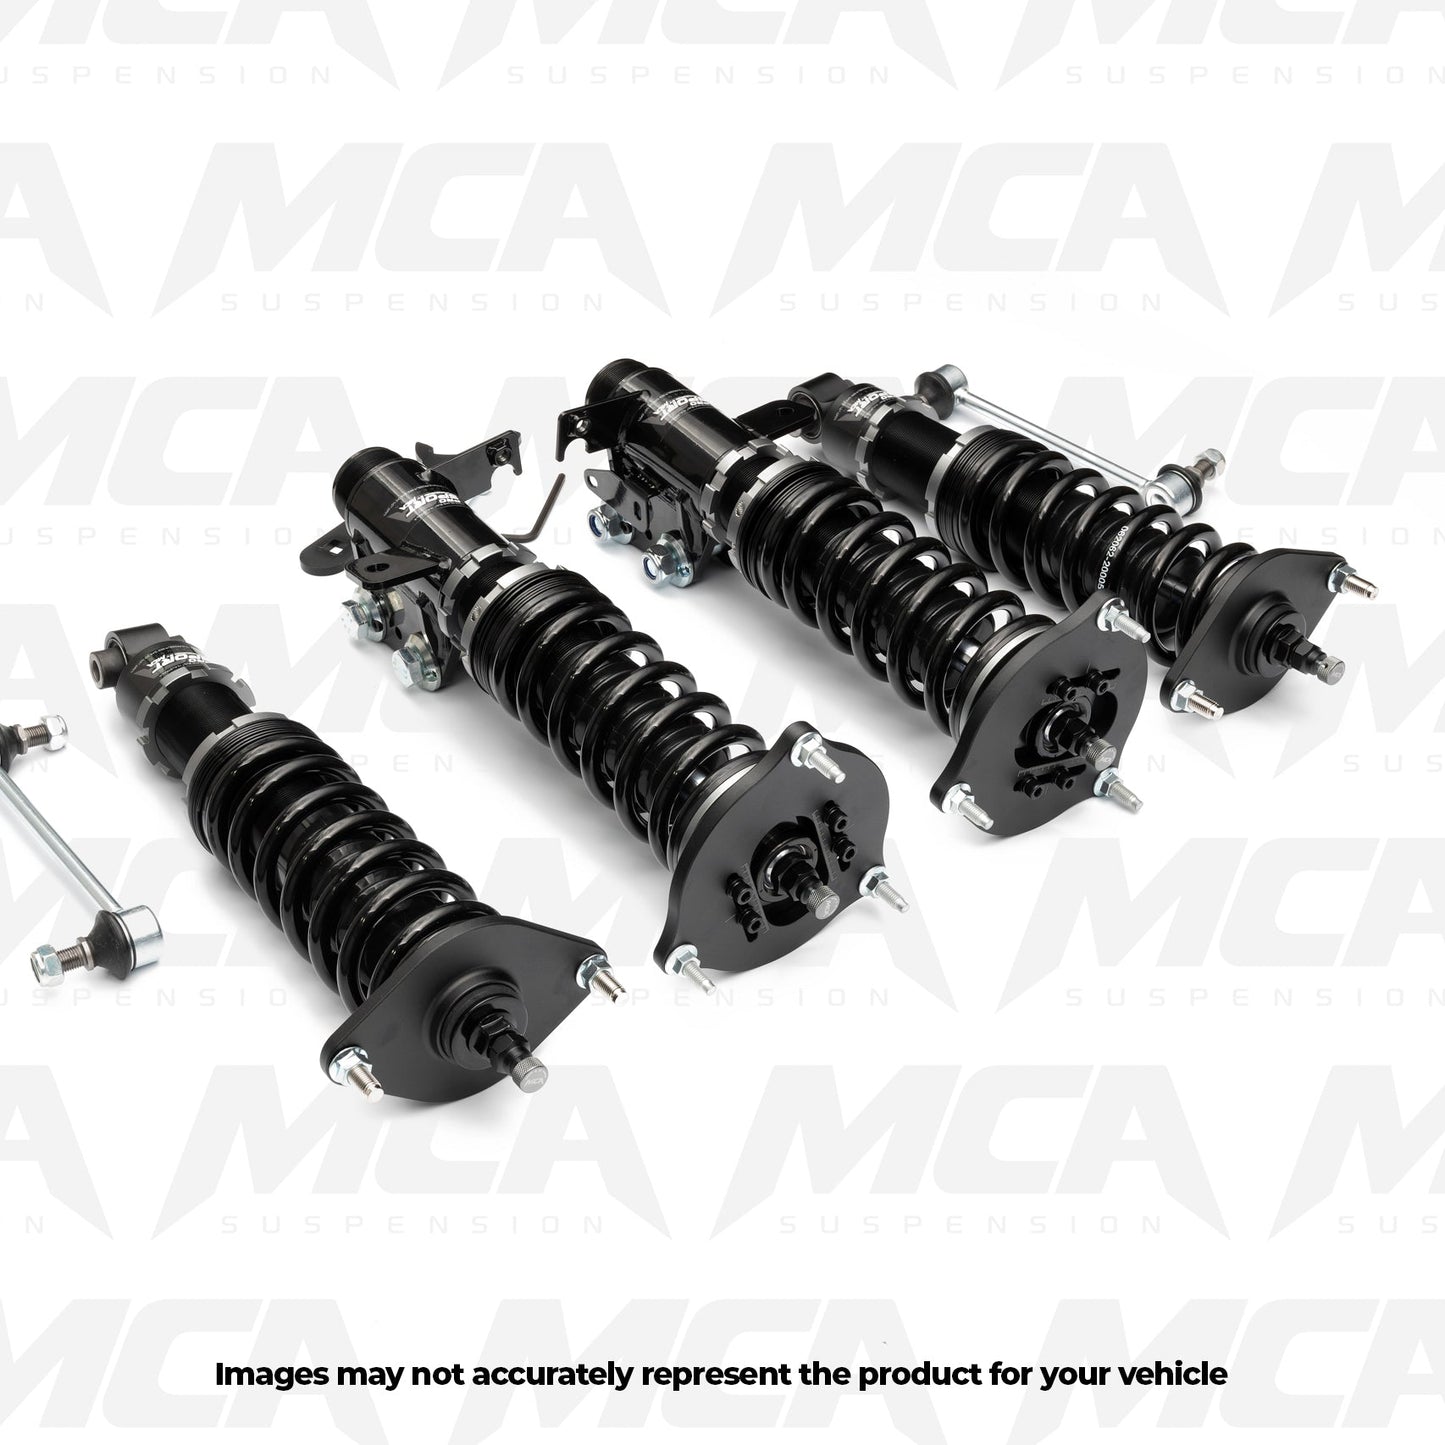 MCA Pro sport coilover suspension designed for road and track use, fully adjustable.